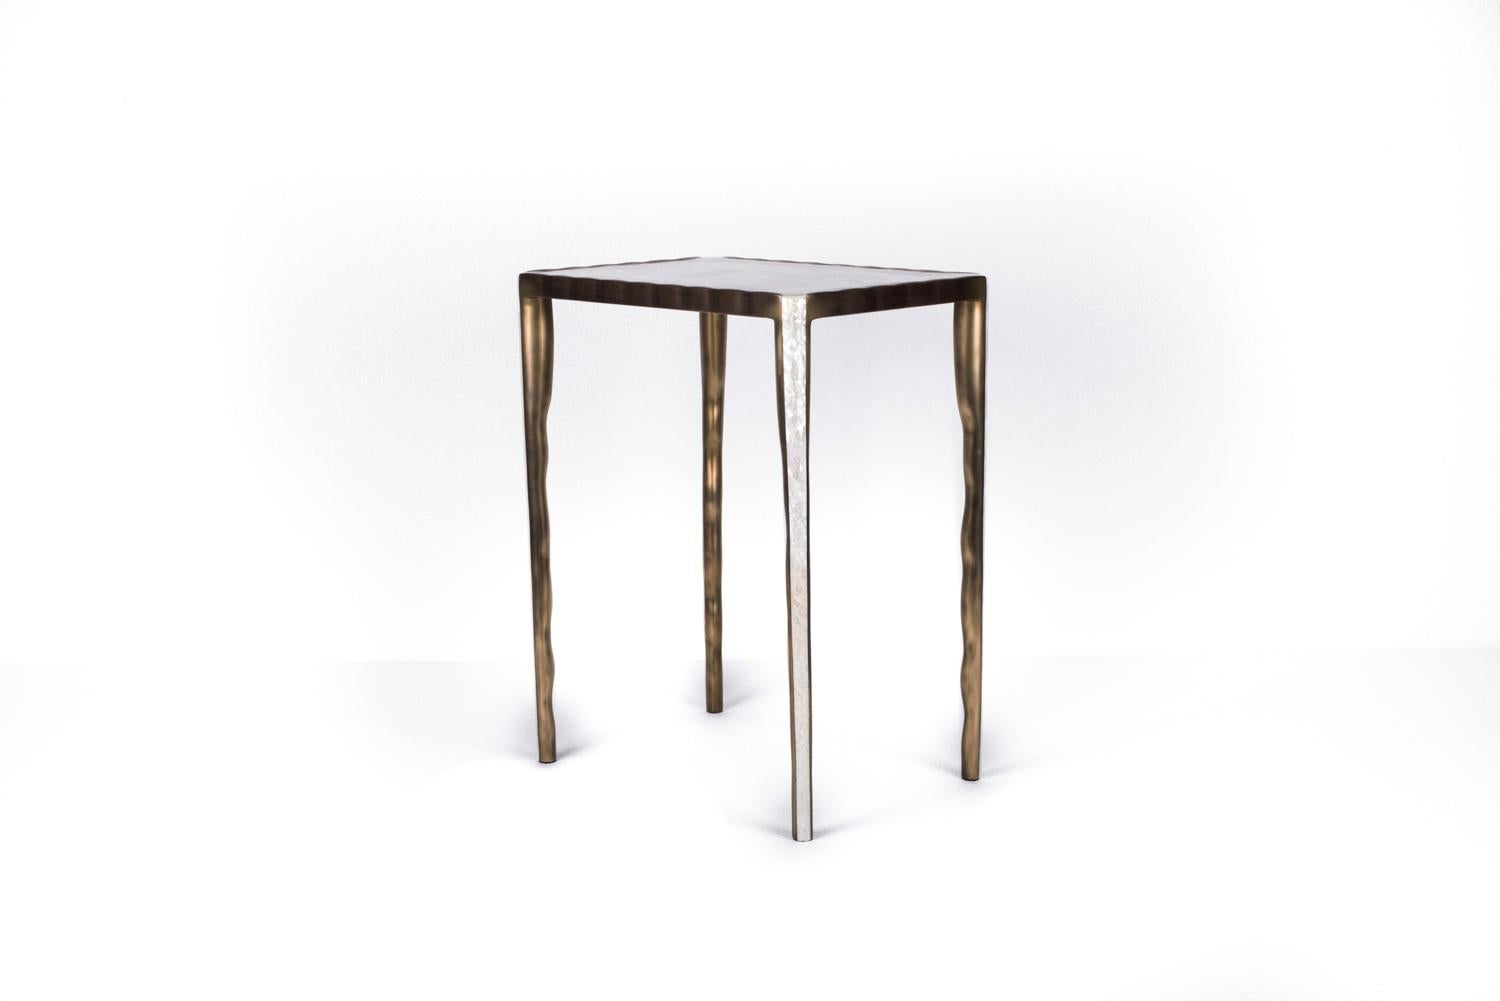 The melting nesting side table in medium is part of a series of nesting side tables (sold separately). One can purchase the tables on their own or buy them as a set to create elegant and geometric shapes. This piece is inlaid in mother of pearl and